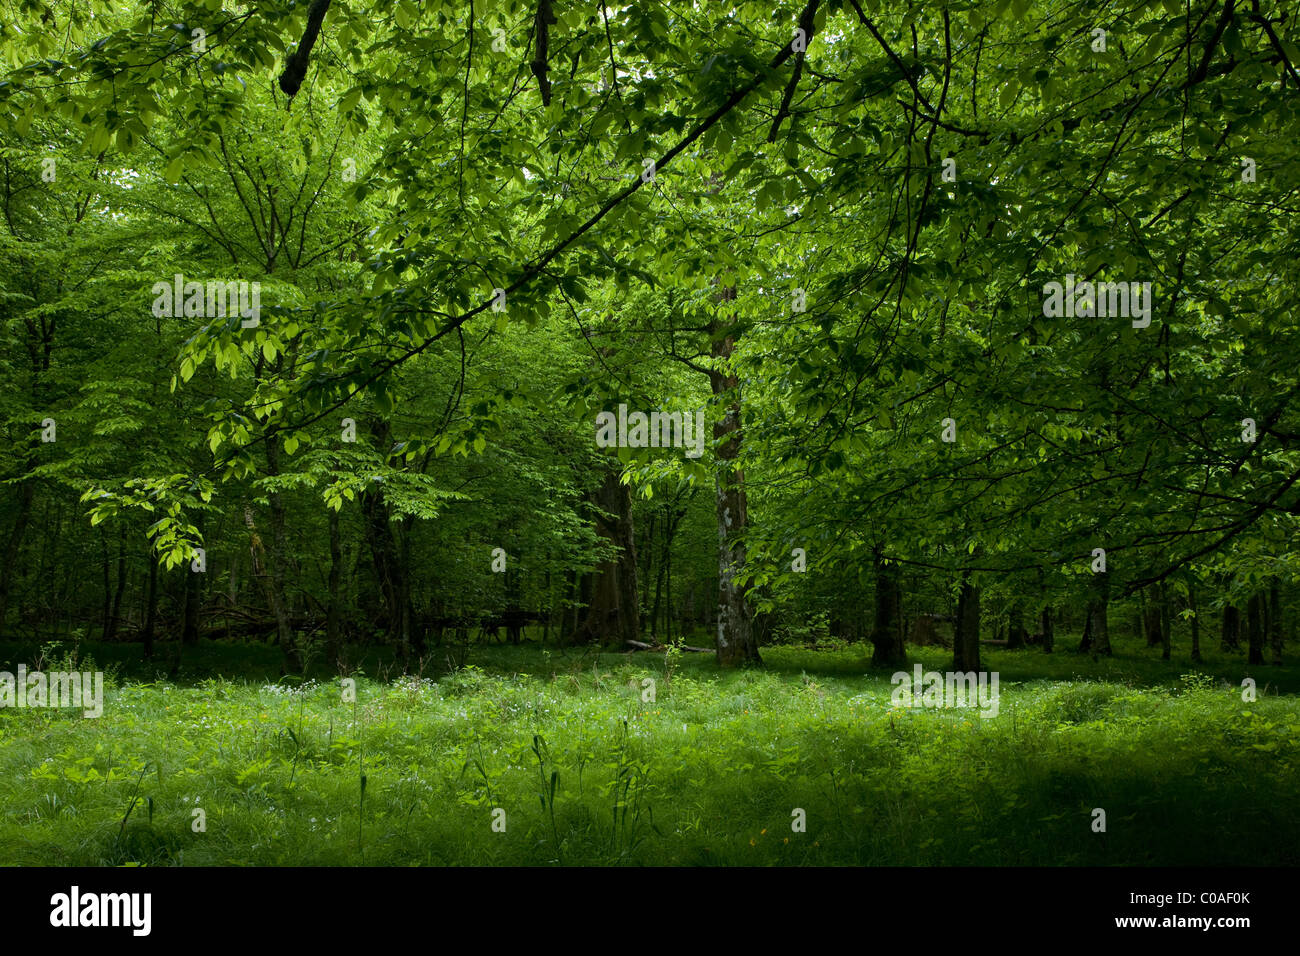 Shady deciduous stand of Bialowieza Forest in springtime with fresh green grassy bottom Stock Photo